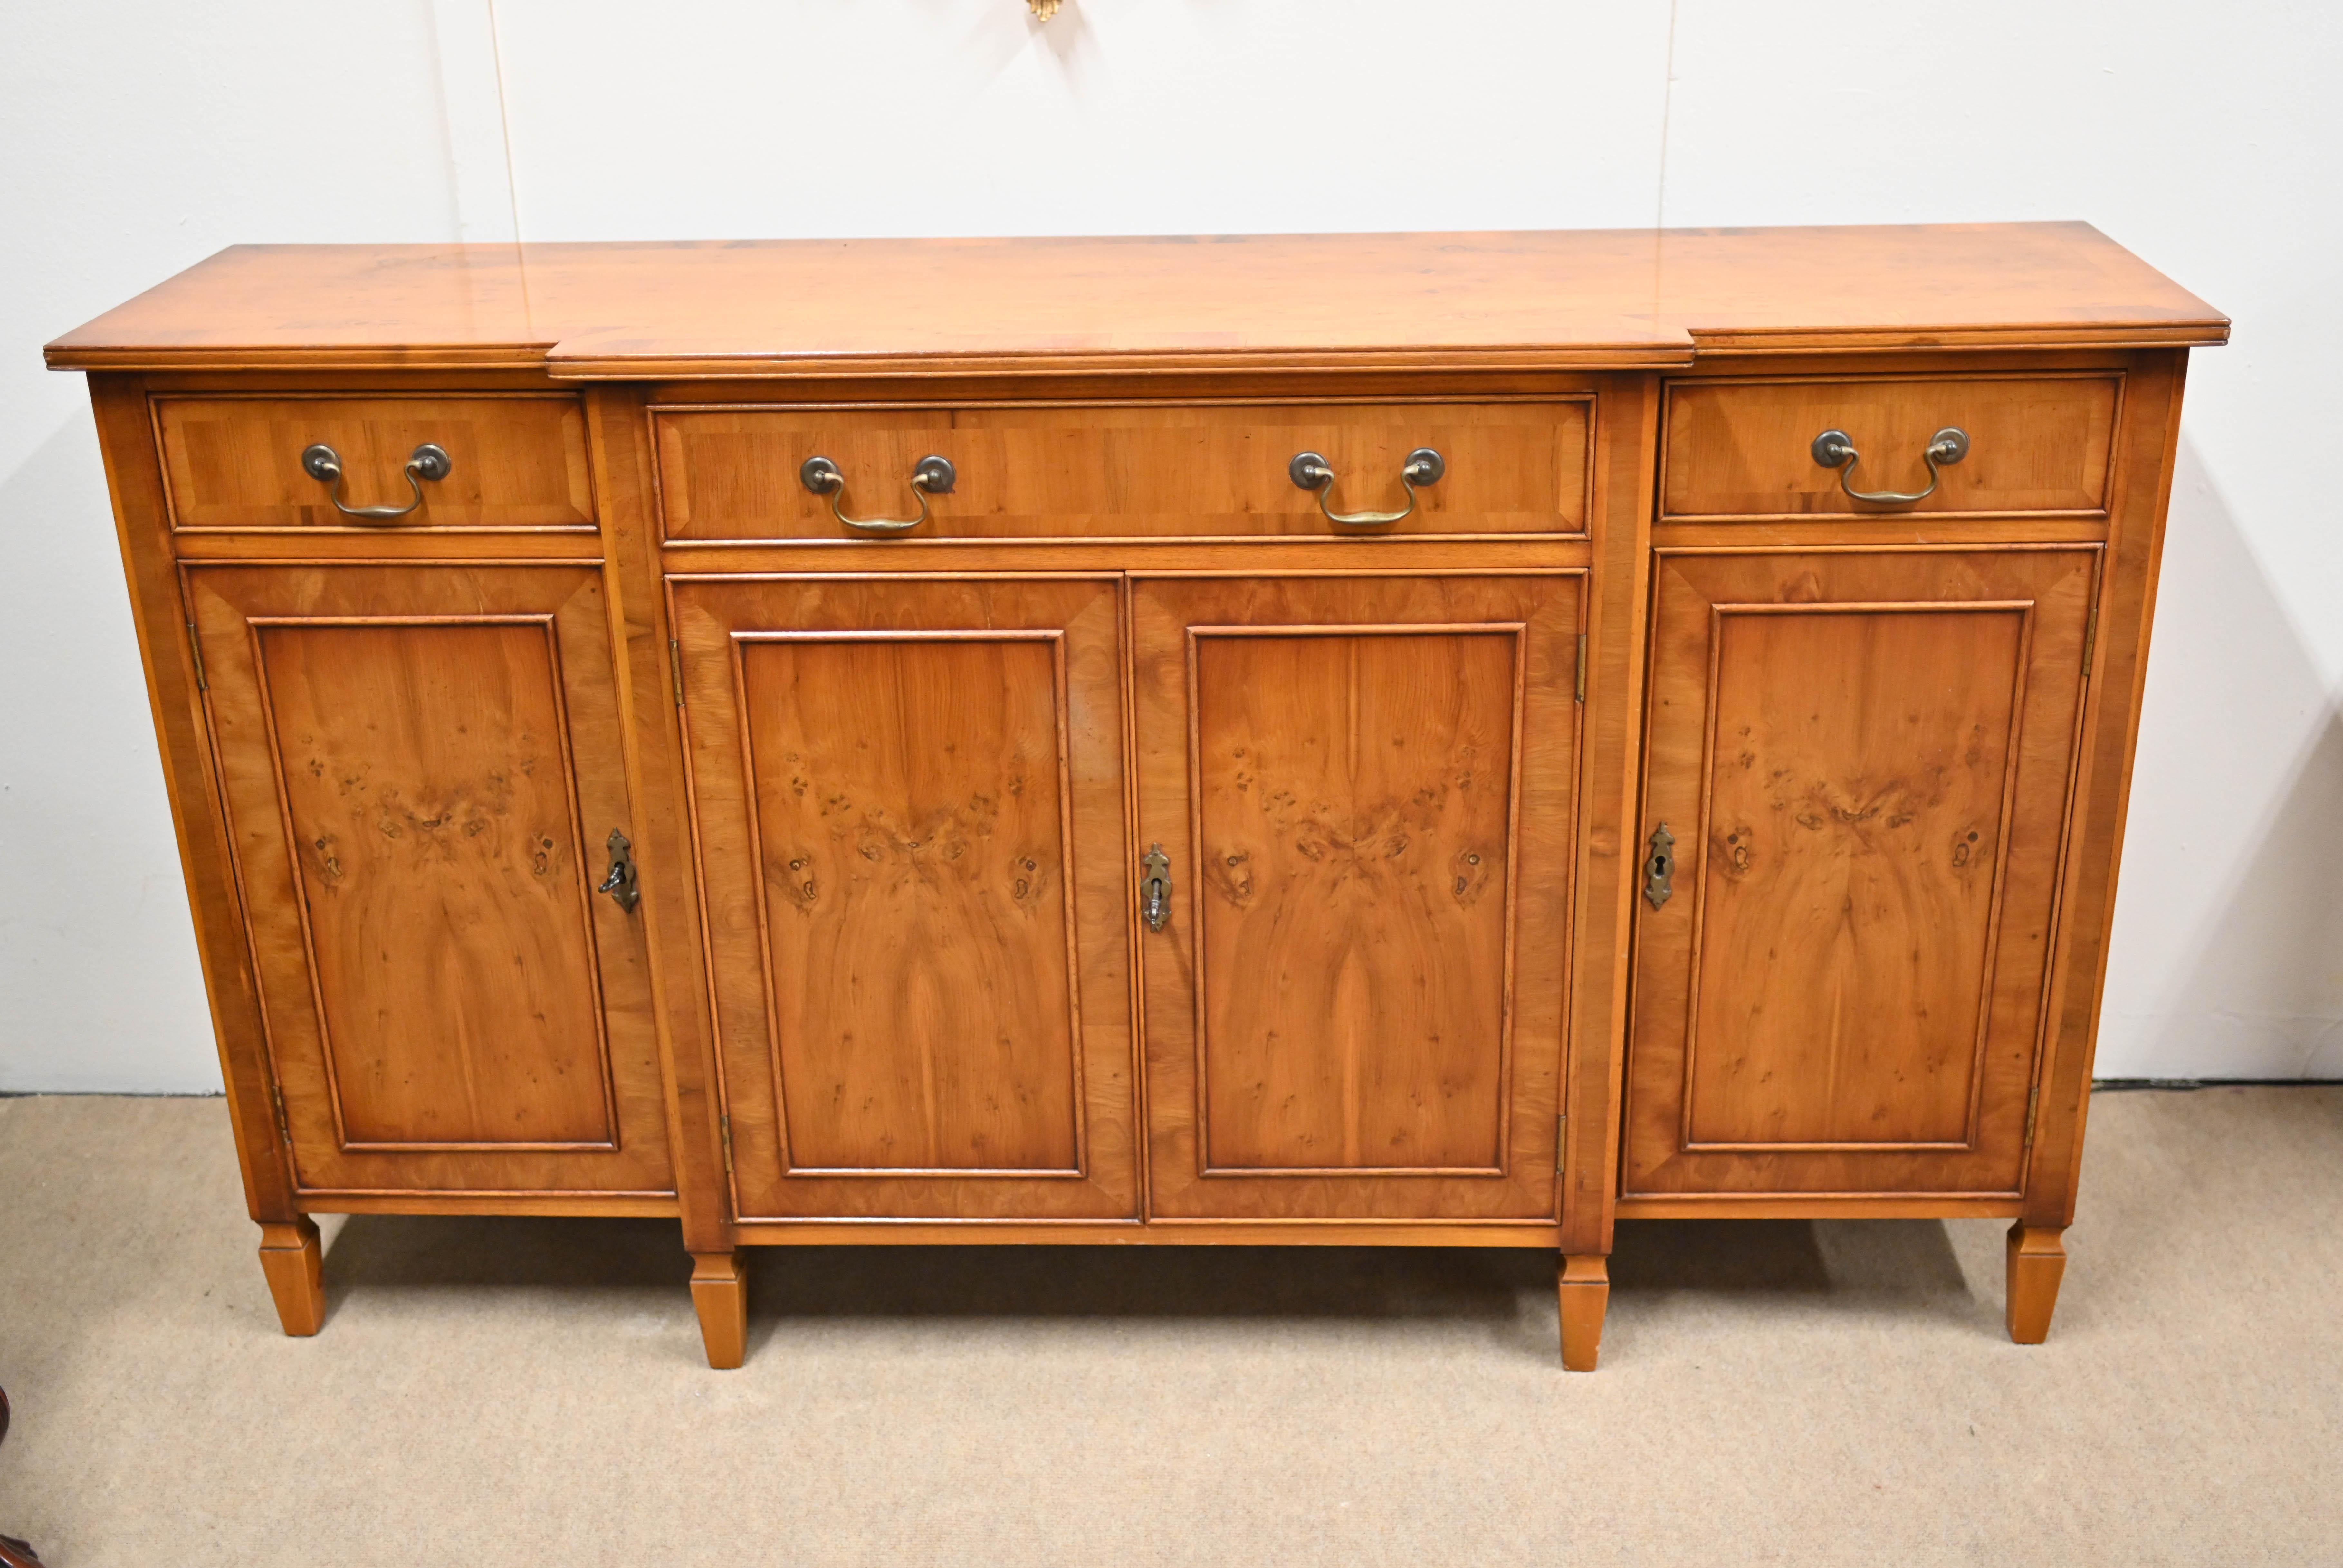 Characterful breakfront sideboard in the Regency style
Love the finish and patino the yew wood
Drawers at the top features felt finished interiors for cutlery
Circa 1930
Offered in great condition ready for home use right away
Will ship to anywhere